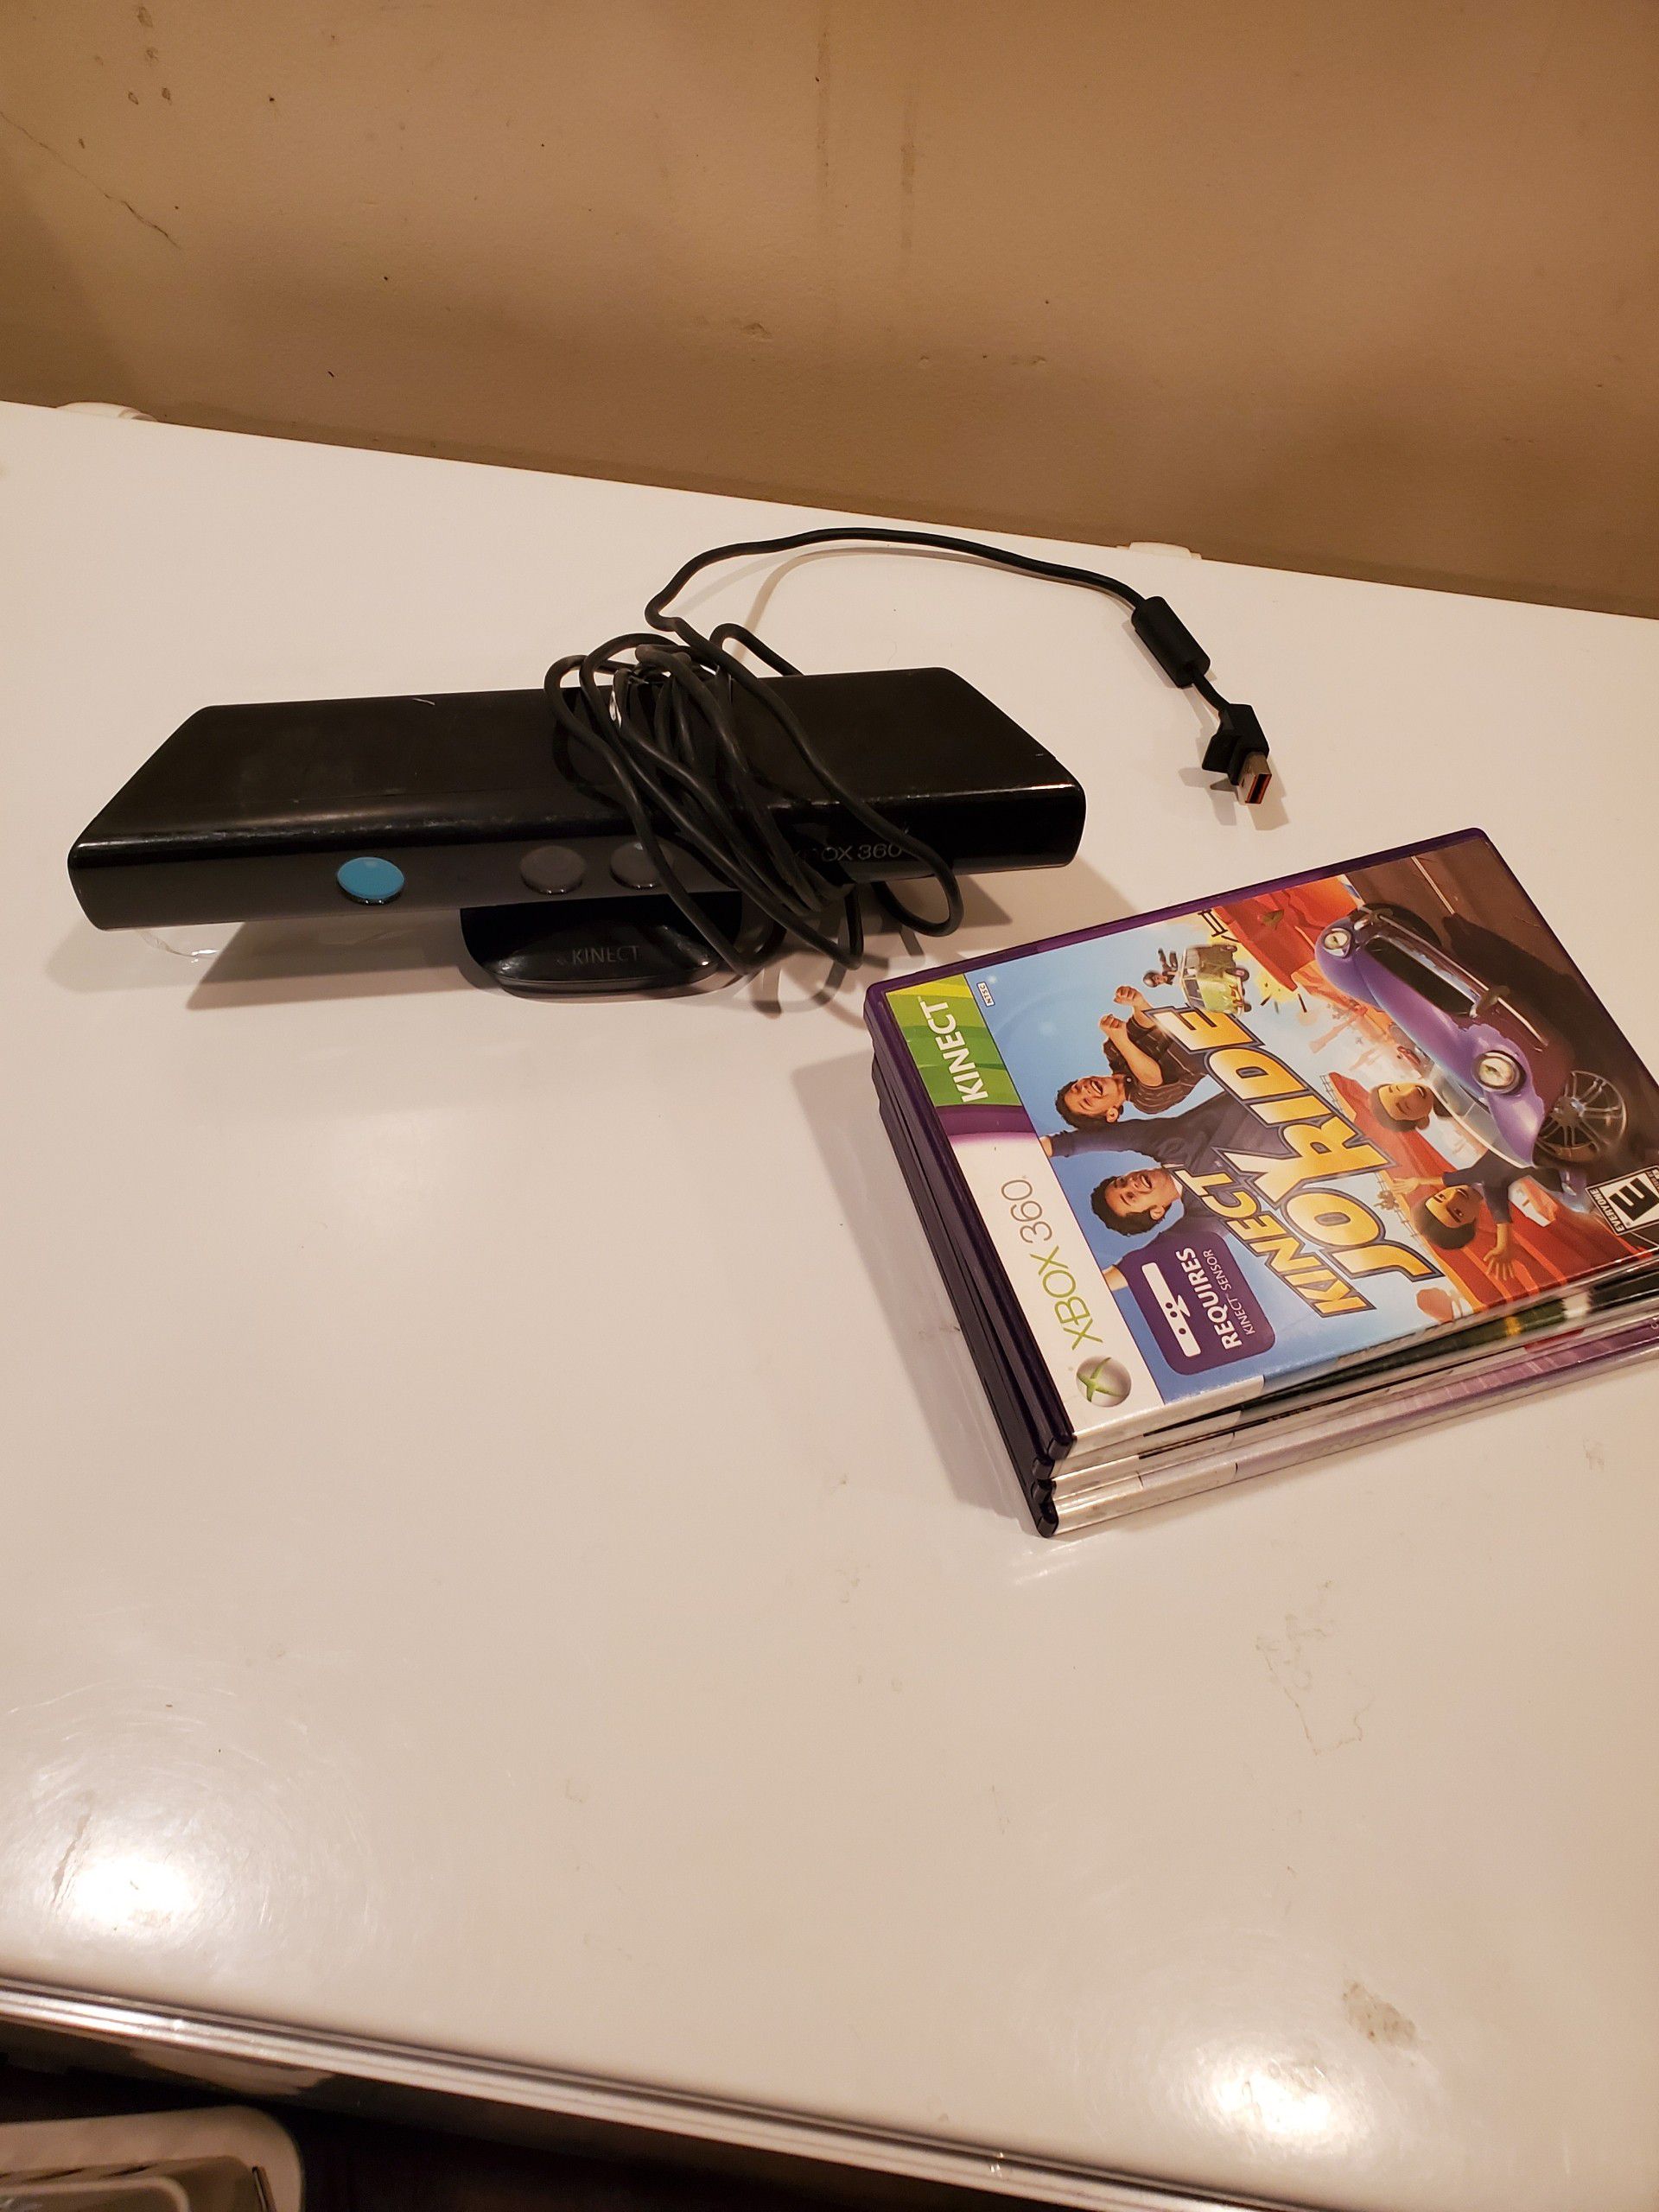 Xbox 360 Kinect and games